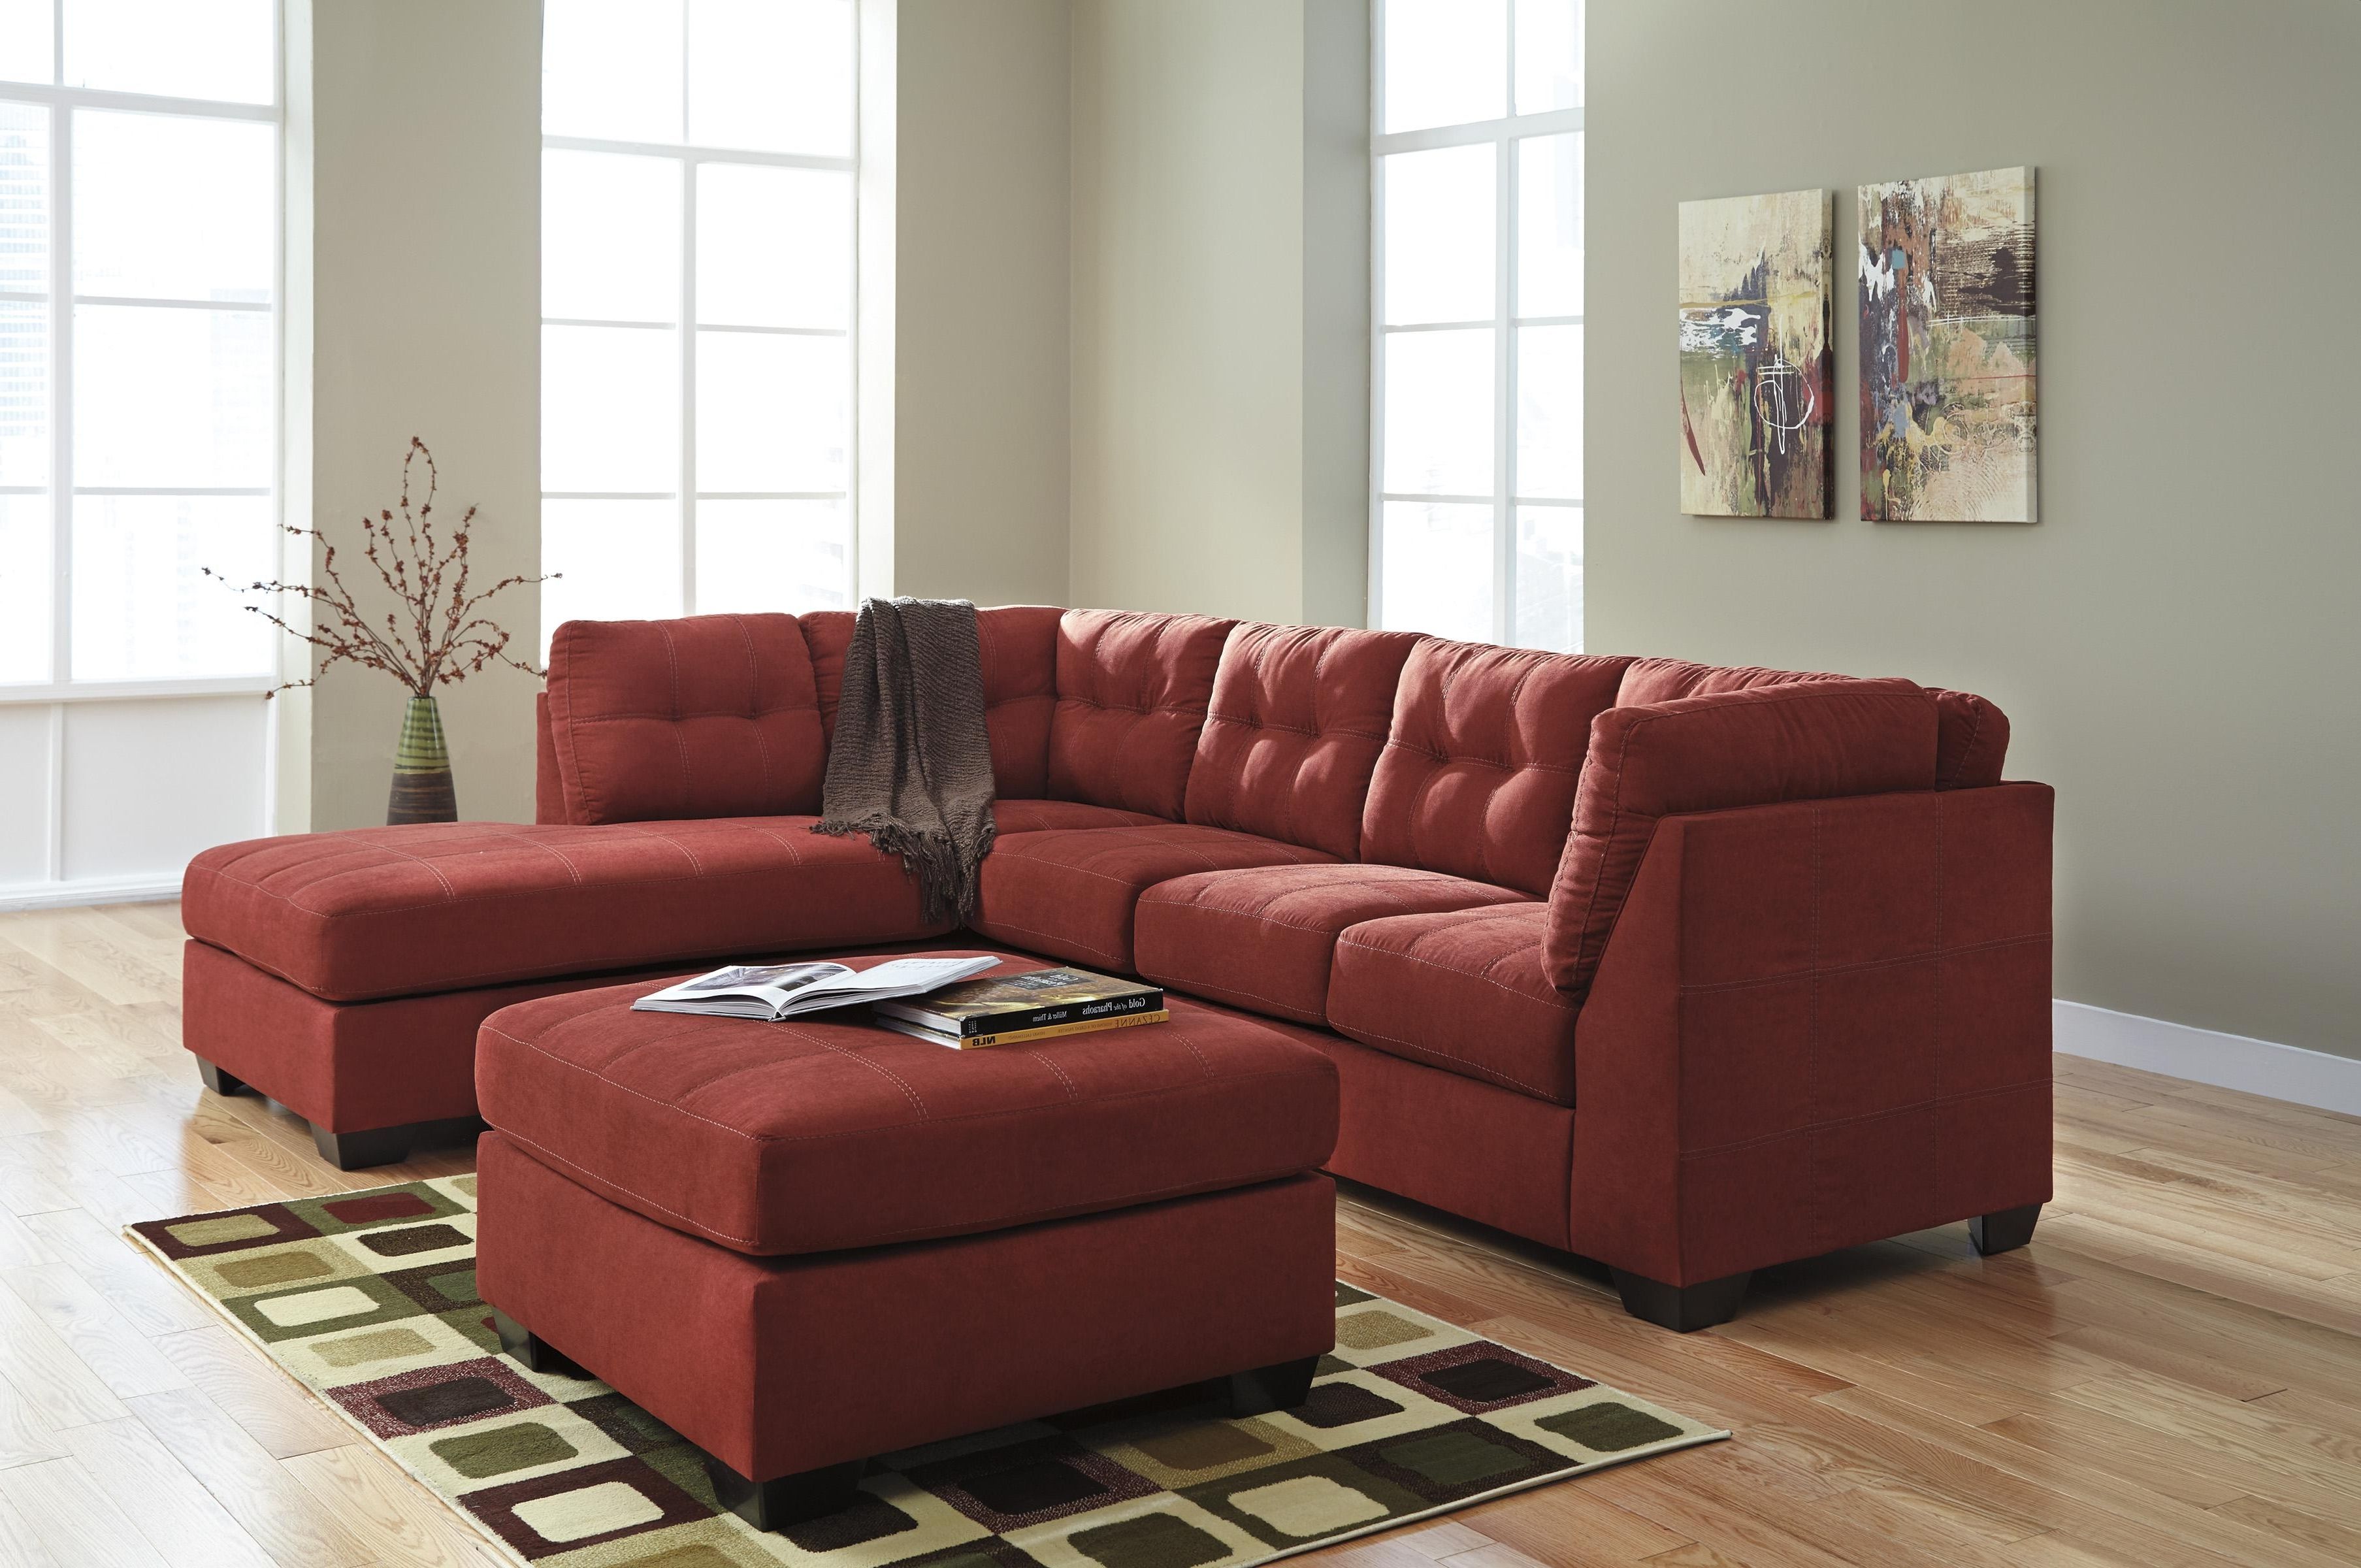 Most Up To Date Joining Hardware Sectional Sofas In Furniture : 5060 Recliner Sectional Sofa Costco $699 Corner Couch (View 5 of 20)